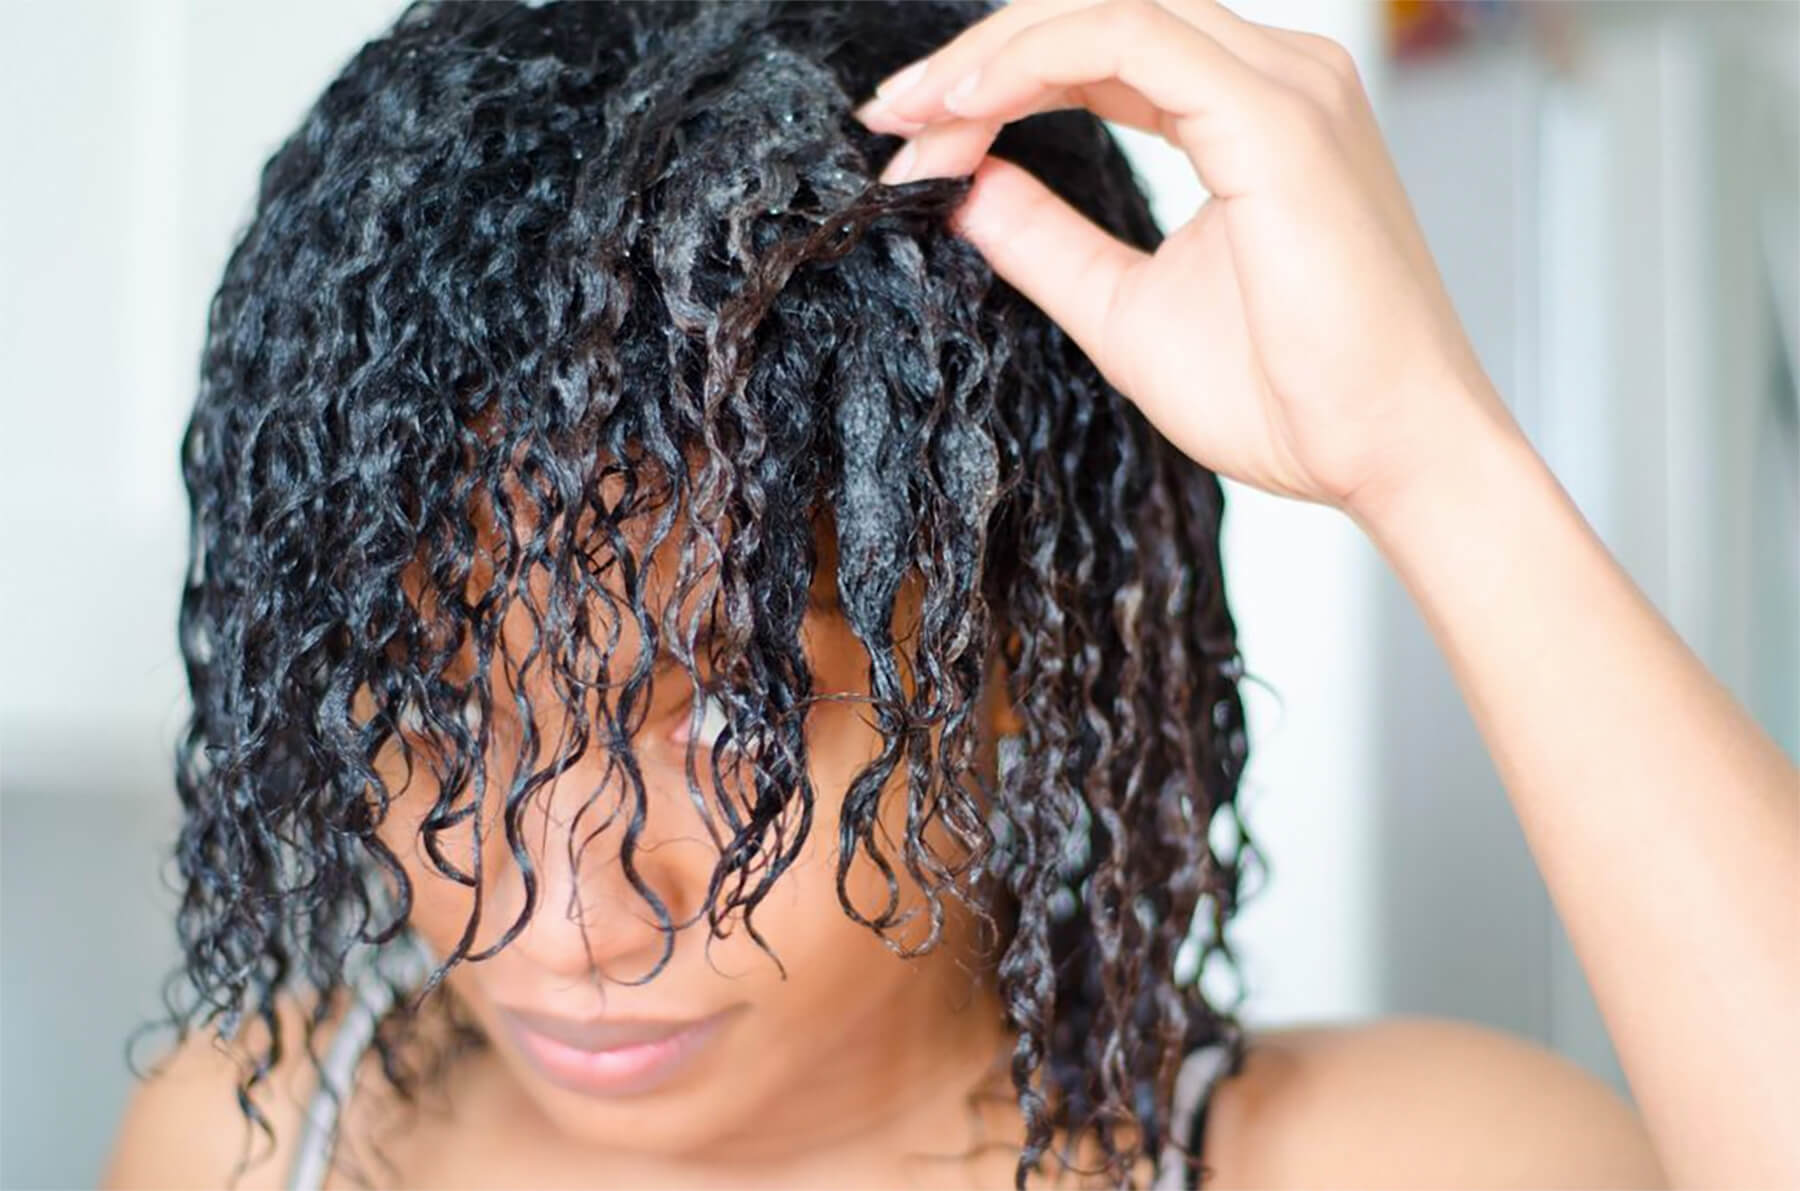 How to detangle your hair